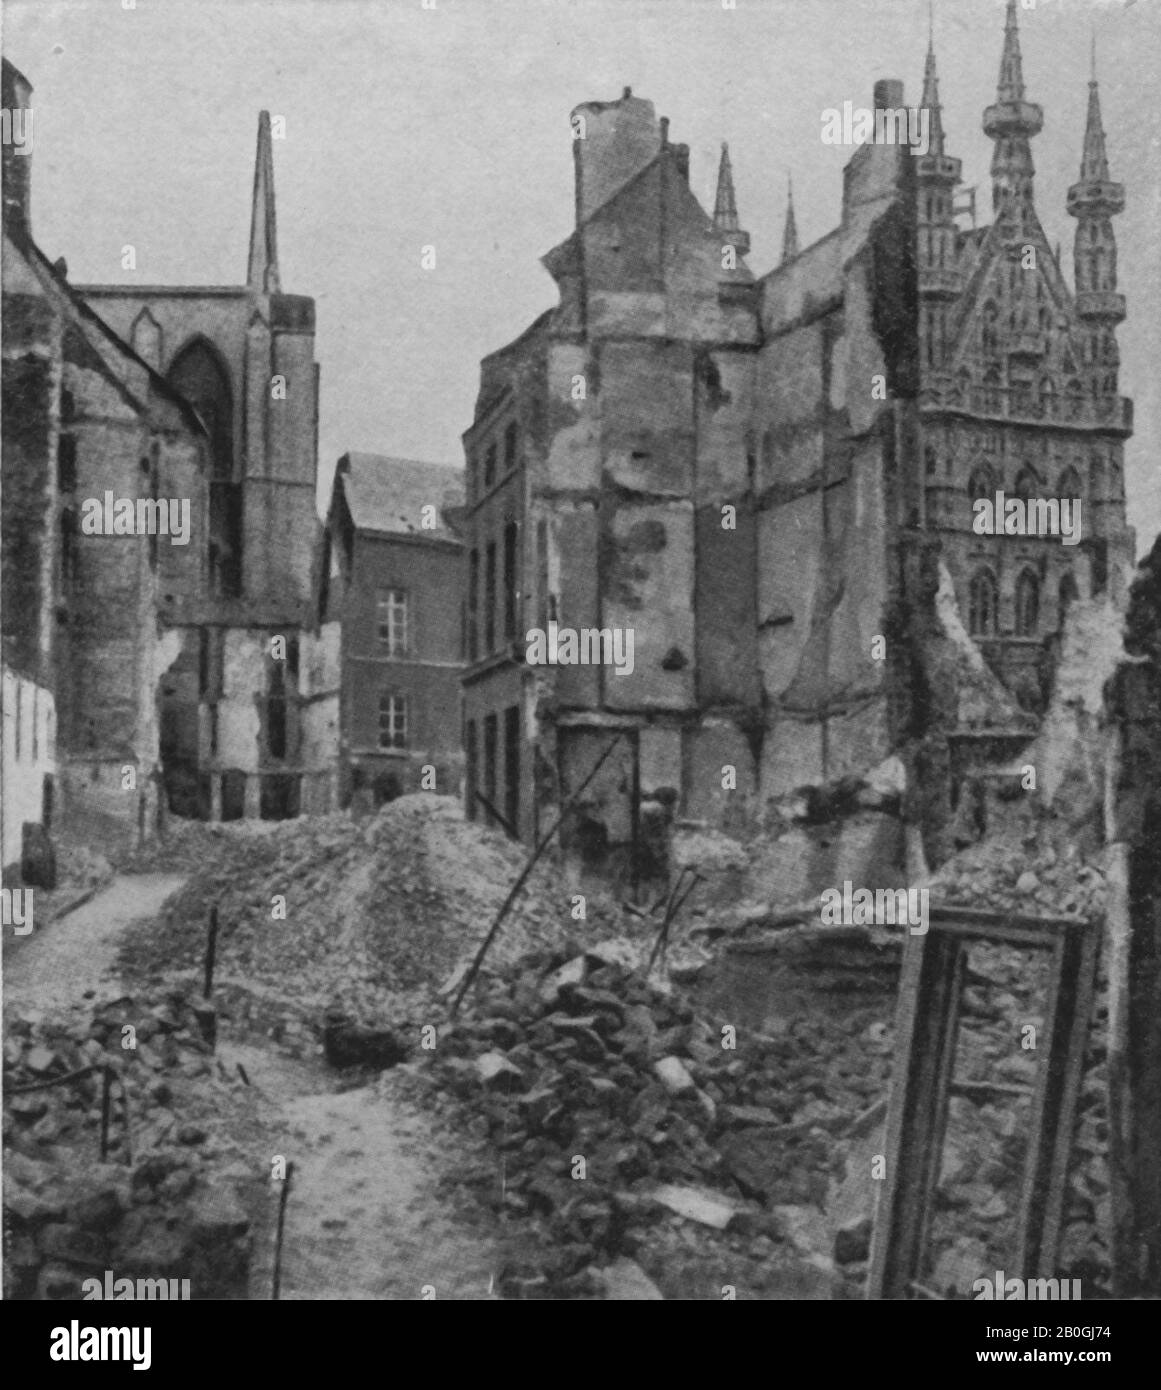 Ruins in the Belgian city of Louvain or Leuven which was systematically burned and destroyed by the German army beginning August 25 1914 Stock Photo